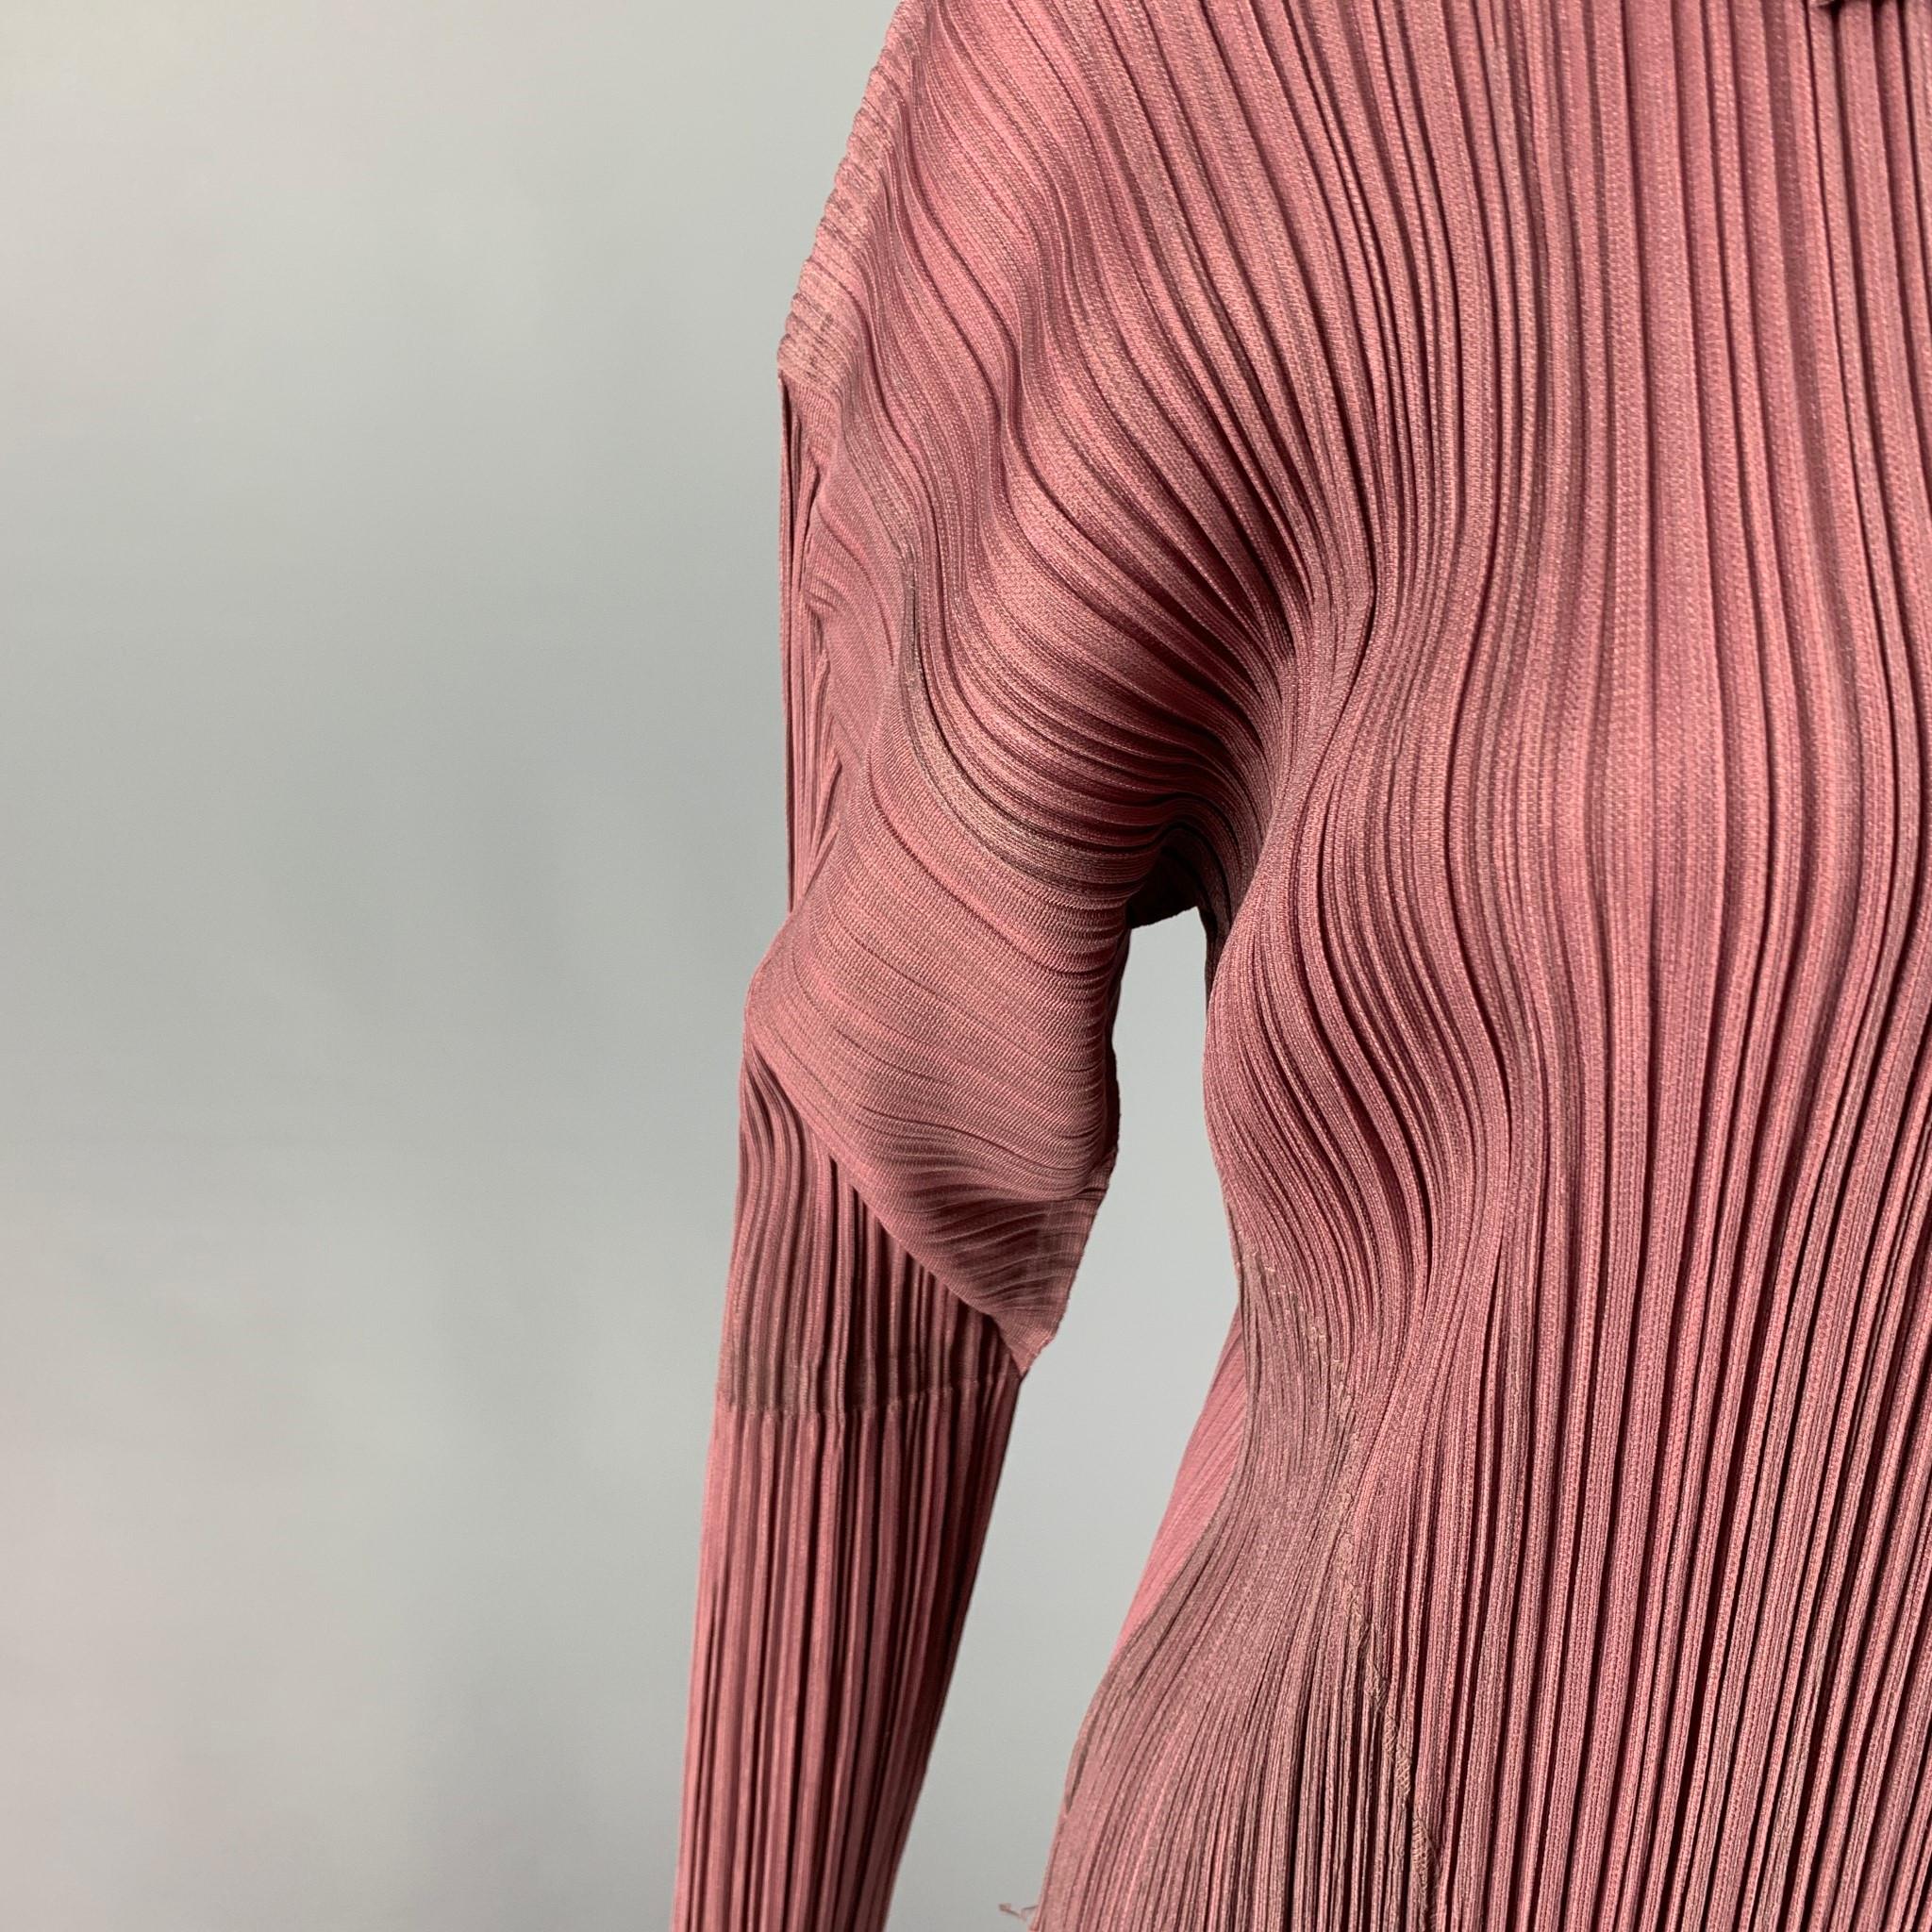 PLEATS PLEASE by ISSEY MIYAKE top comes in a mauve material featuring signature pleated design, spread collar, structured sleeves, and a full zip up closure. 

Excellent Pre-Owned Condition.
Marked: JP 2

Measurements:

Shoulder: 22 in.
Bust: 38